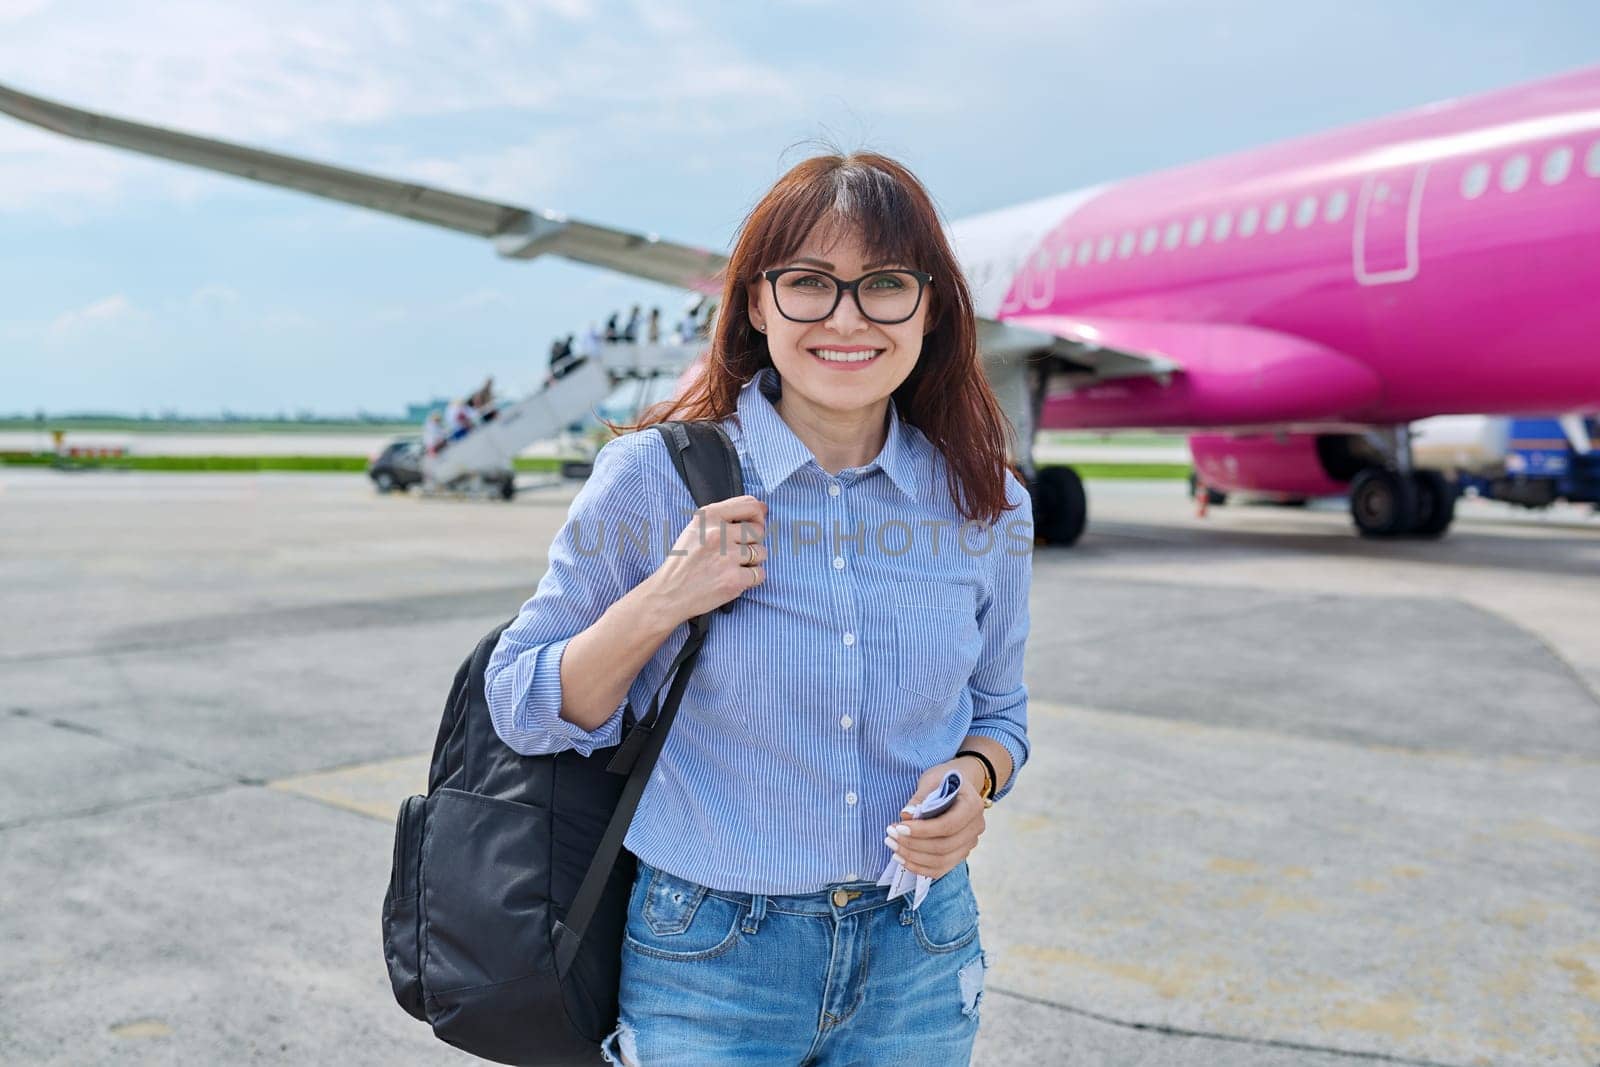 Outdoor portrait of smiling middle aged woman with hand luggage backpack looking at camera, passengers boarding plane background. Travel, business trip, air transport concept